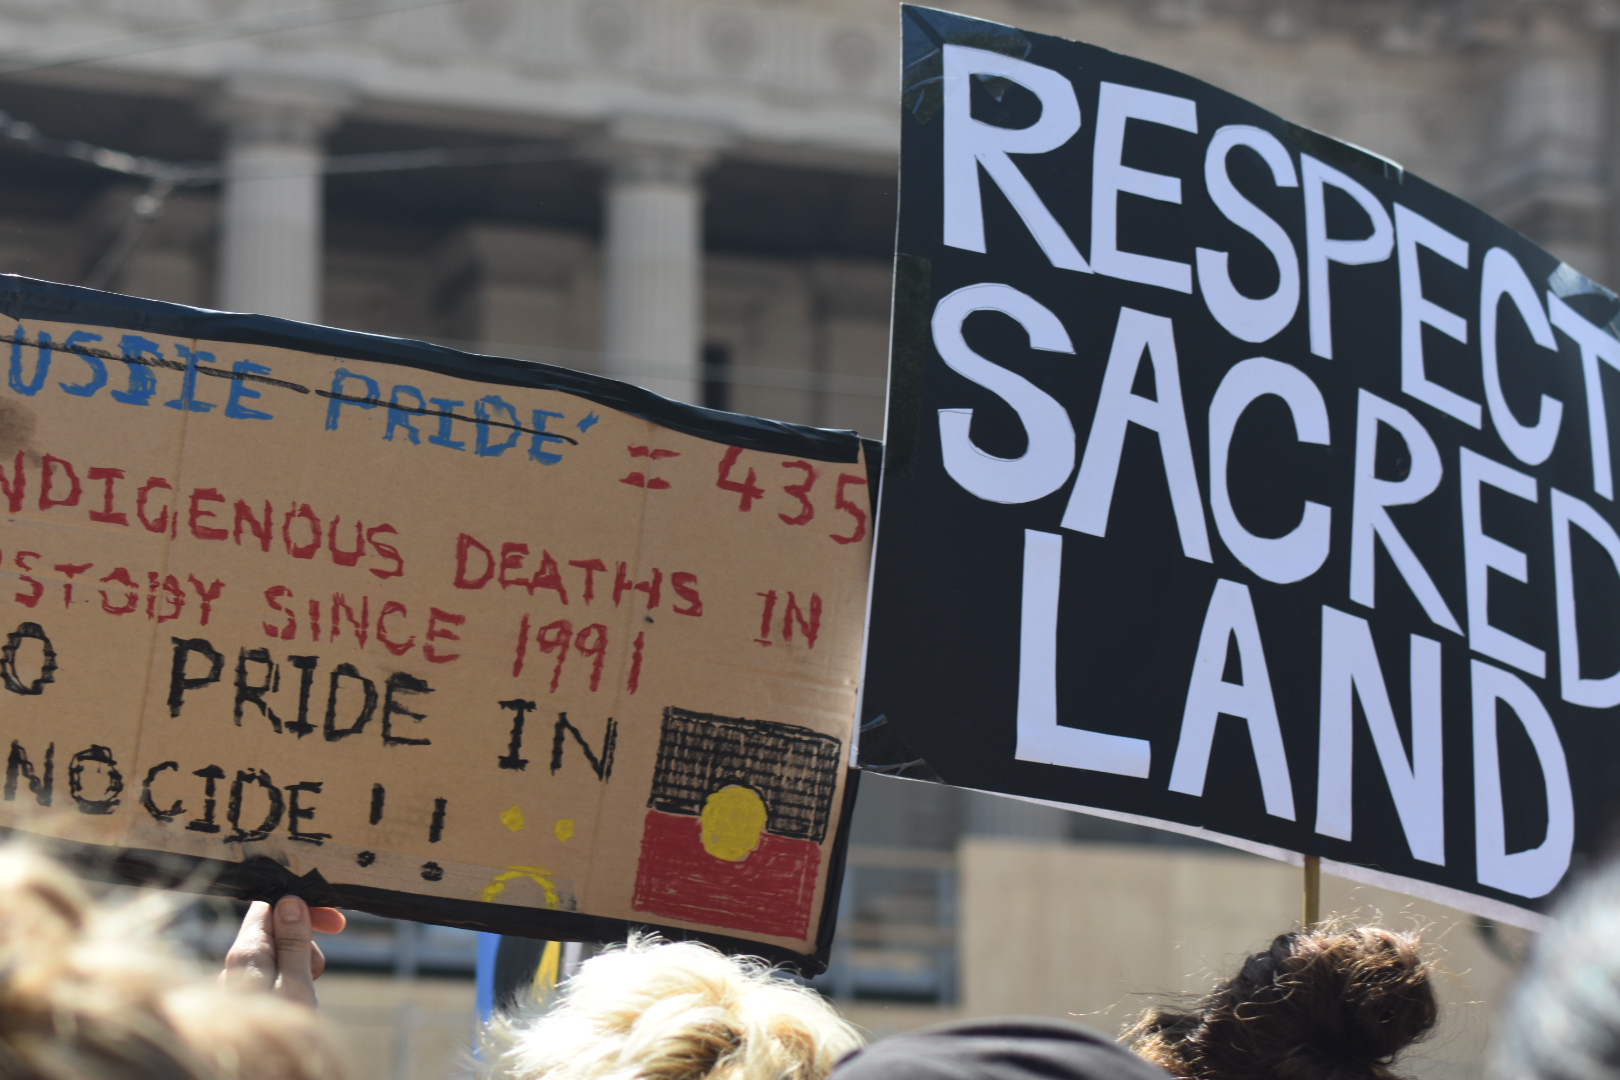 Invasion Day 2020 signs: 'Respect Sacred Land' & 'No Pride in Genocide'